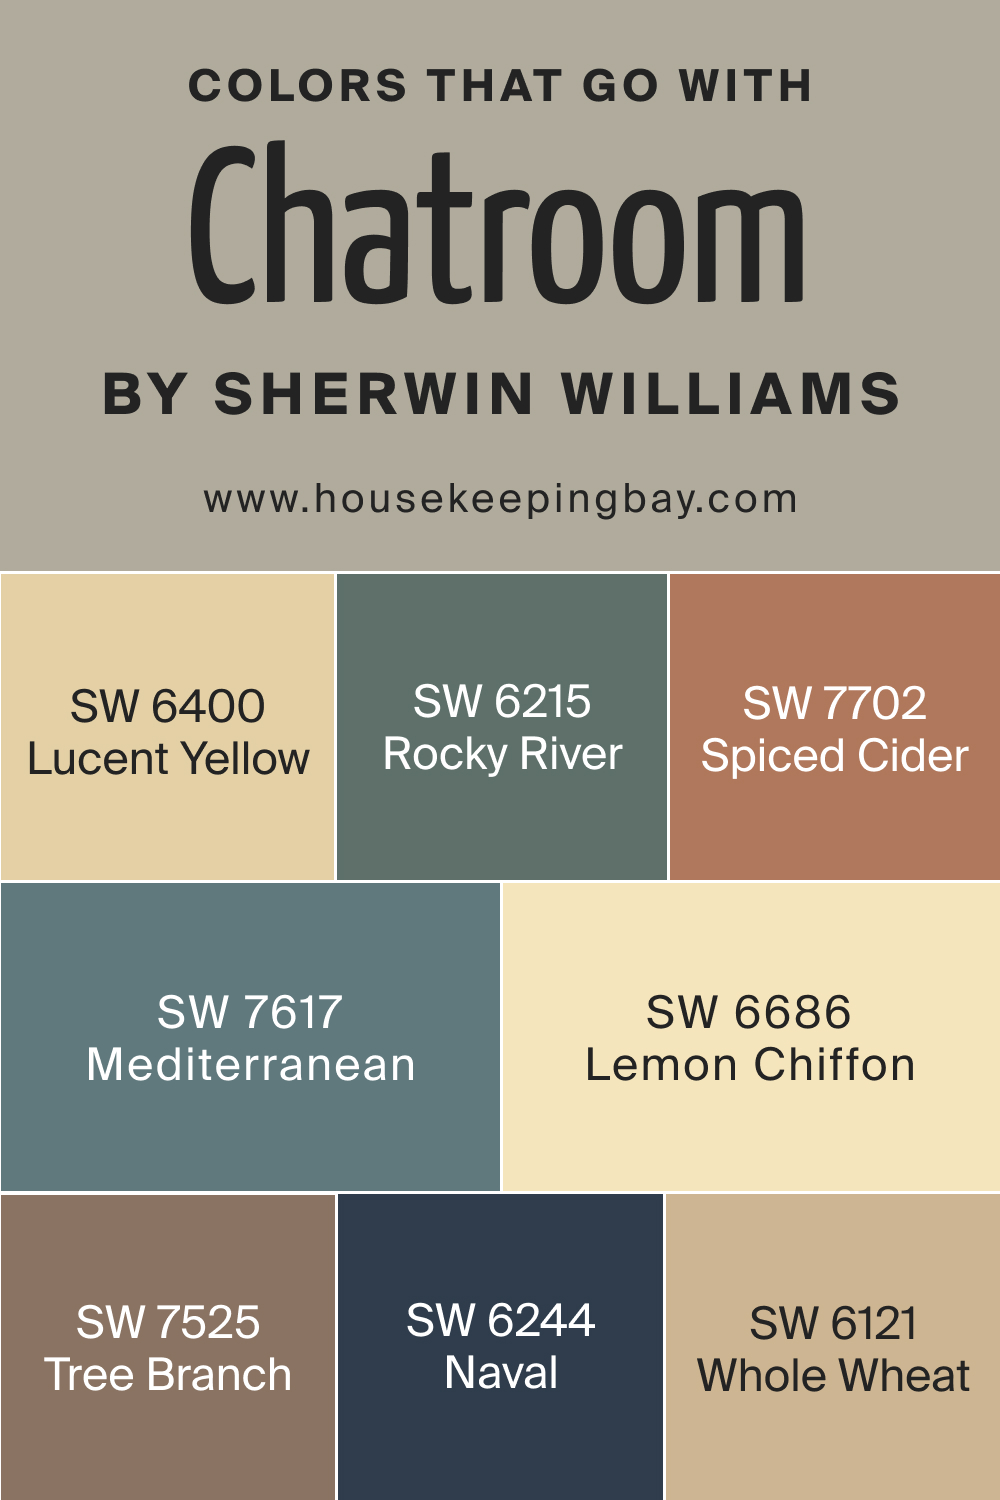 Colors that goes with SW 6171 Chatroom by Sherwin Williams